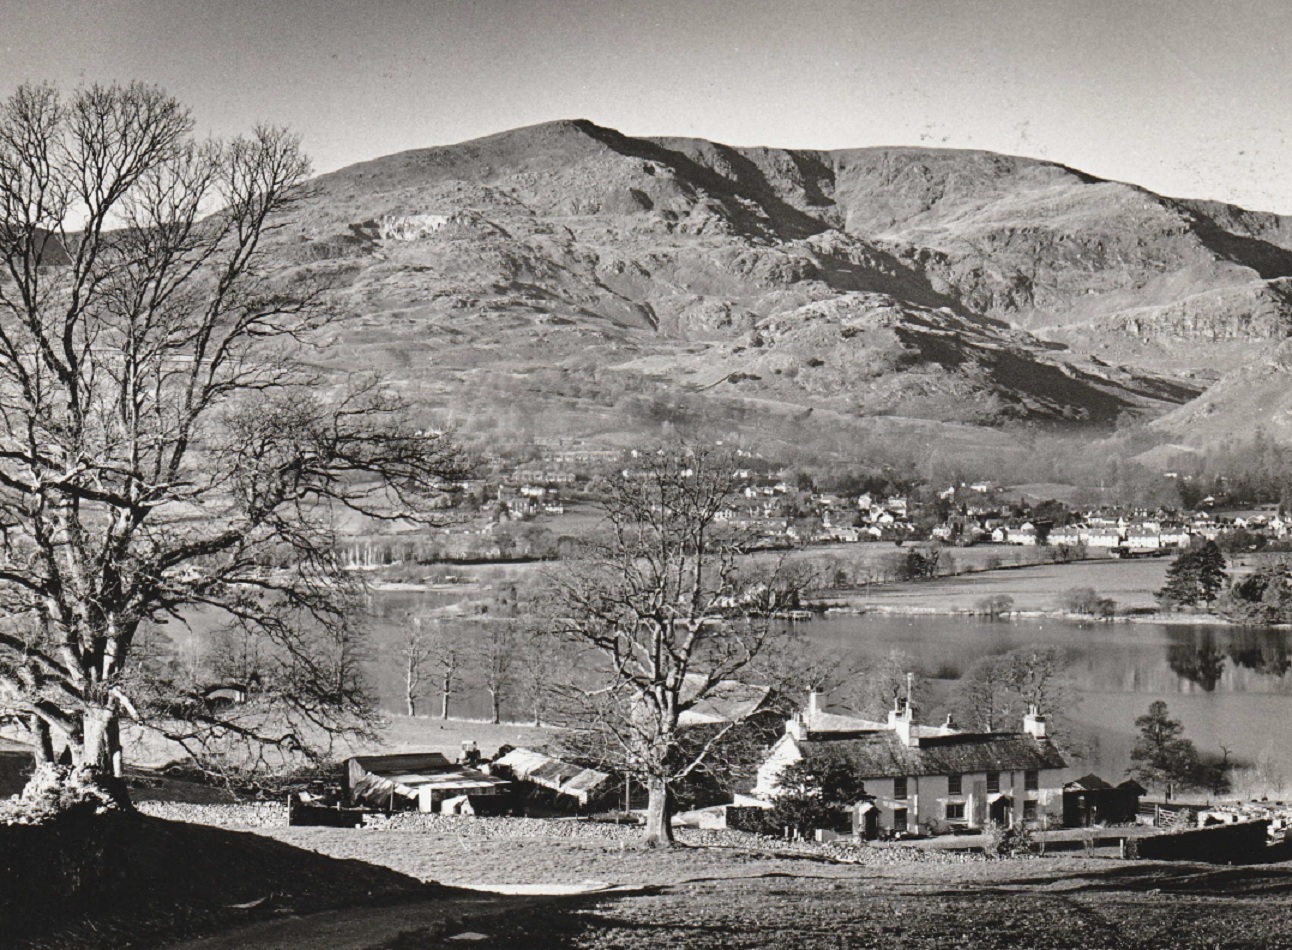 PHOTOGRAPHY: A stunning photograph of Coniston village and The Old Man, which towers above it, taken in 1989